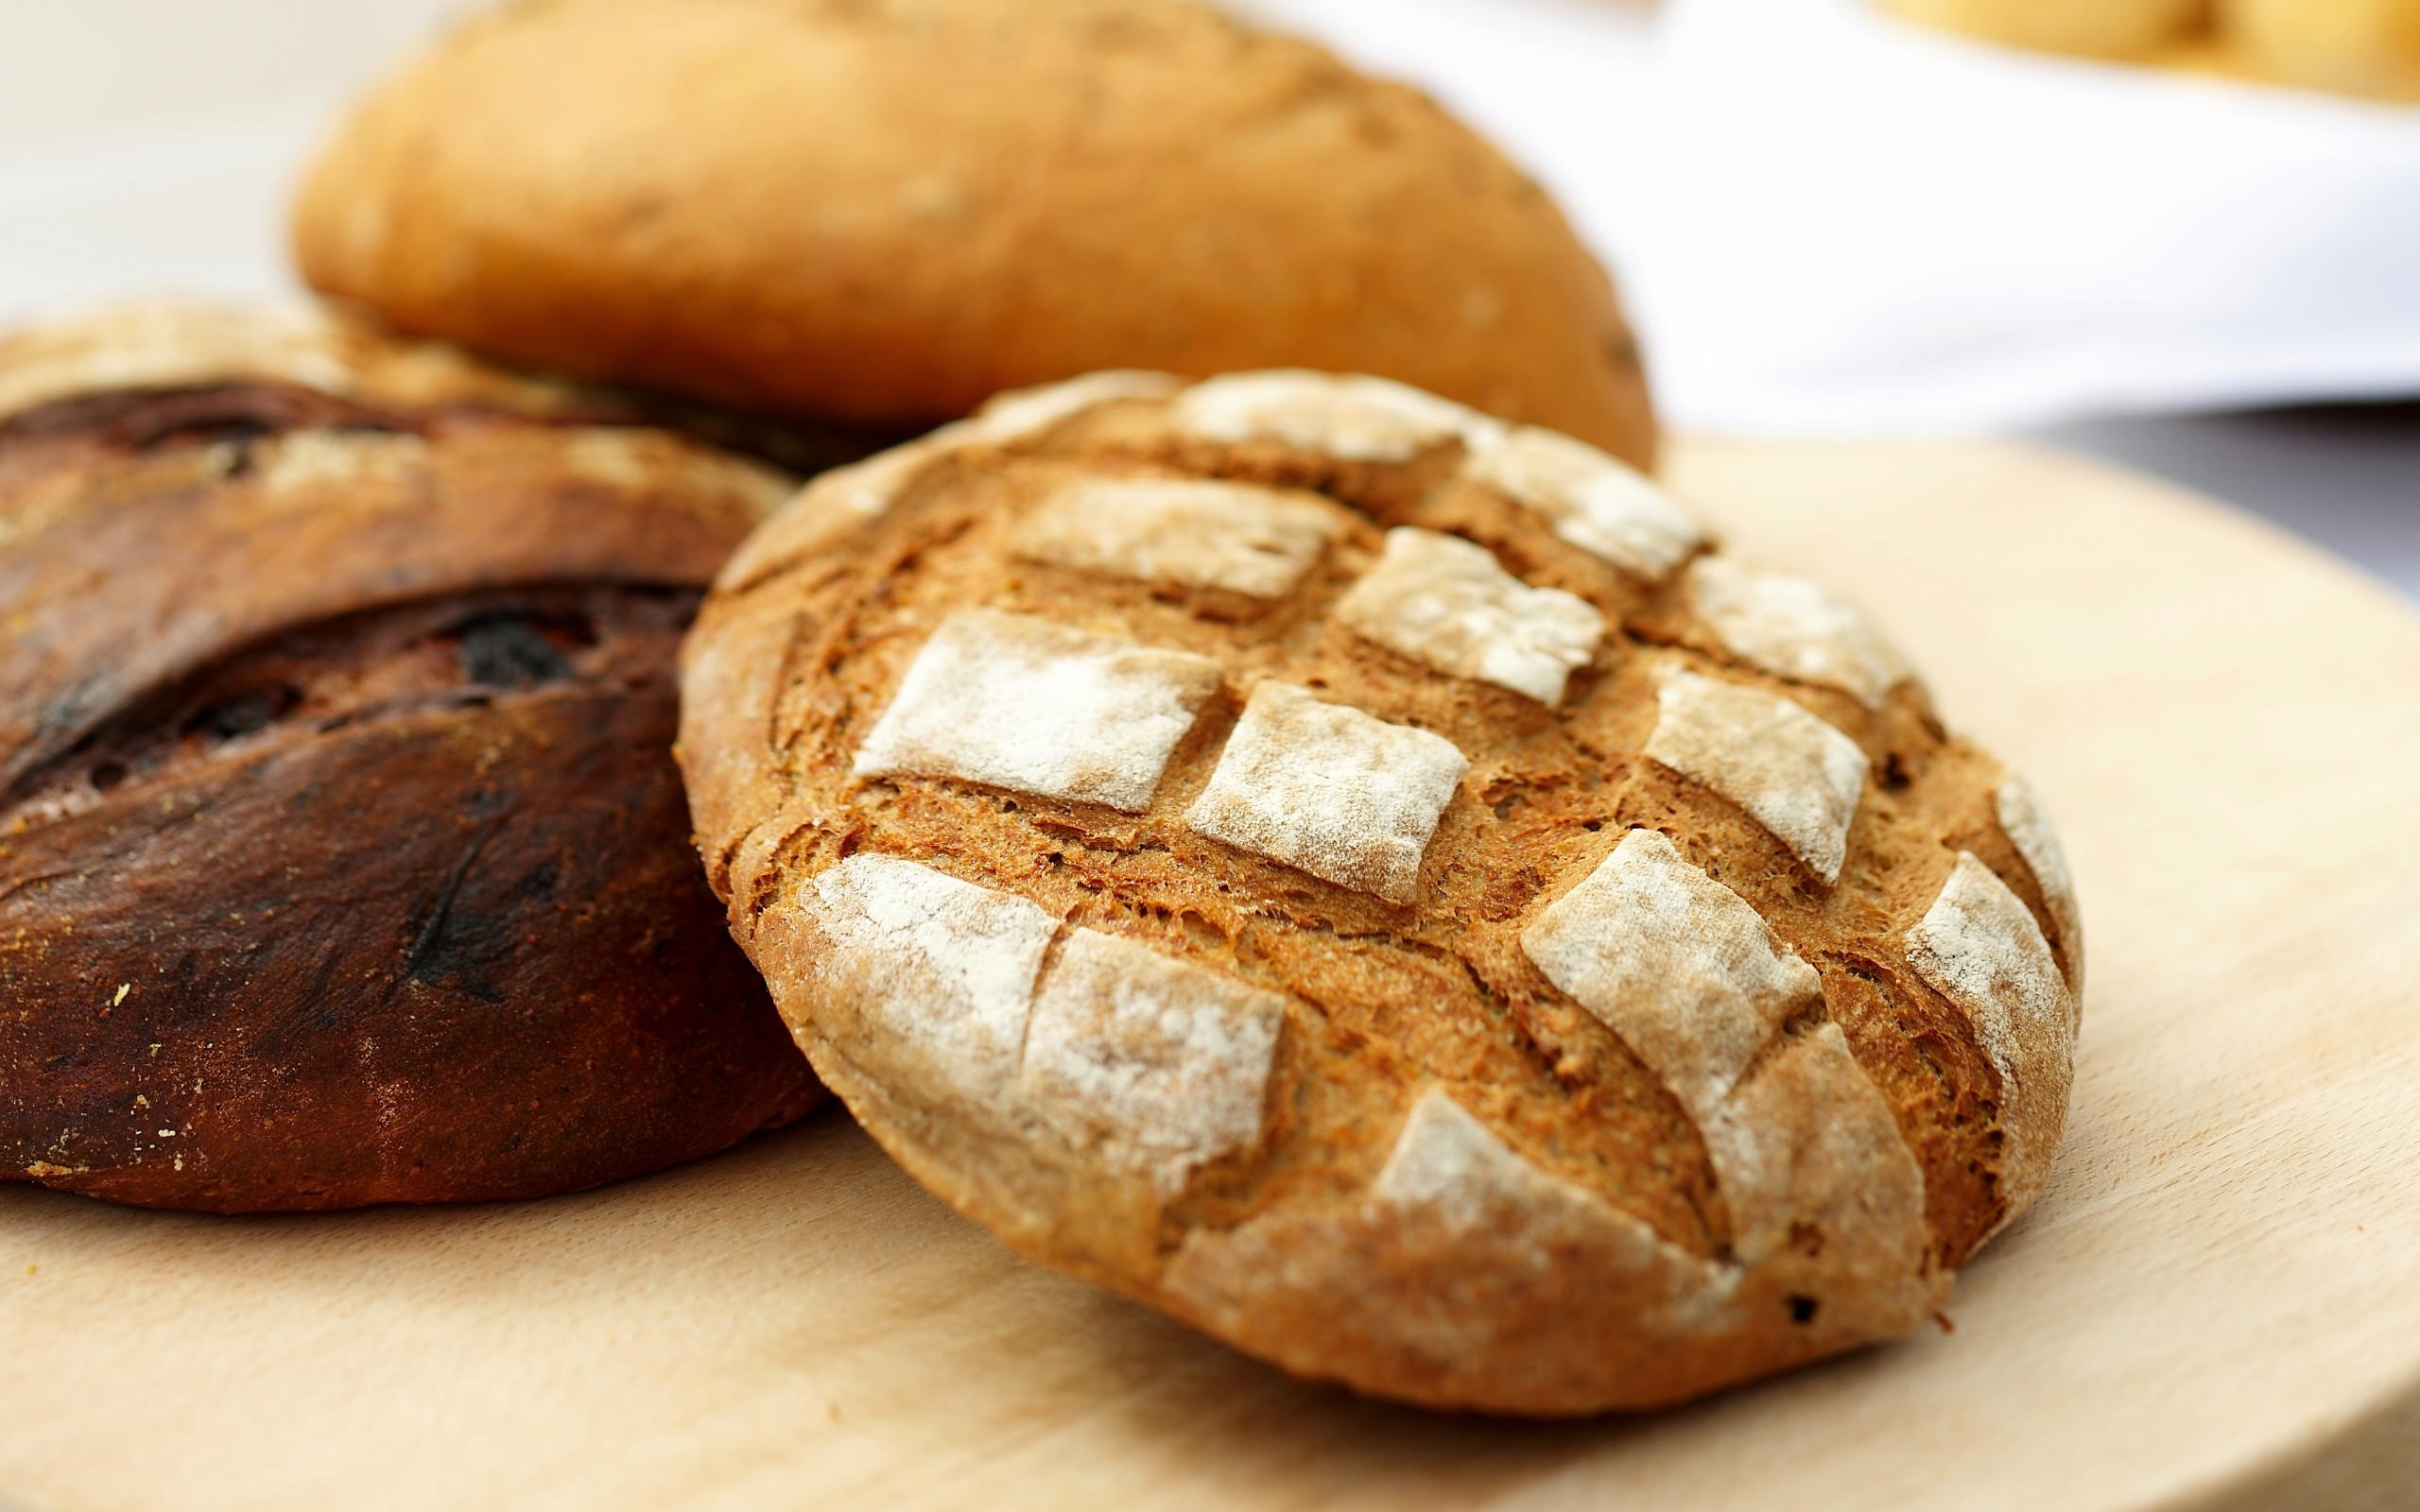 Variety of breads, Delectable selection, Heavenly carbs, Bread lover's paradise, 2560x1600 HD Desktop